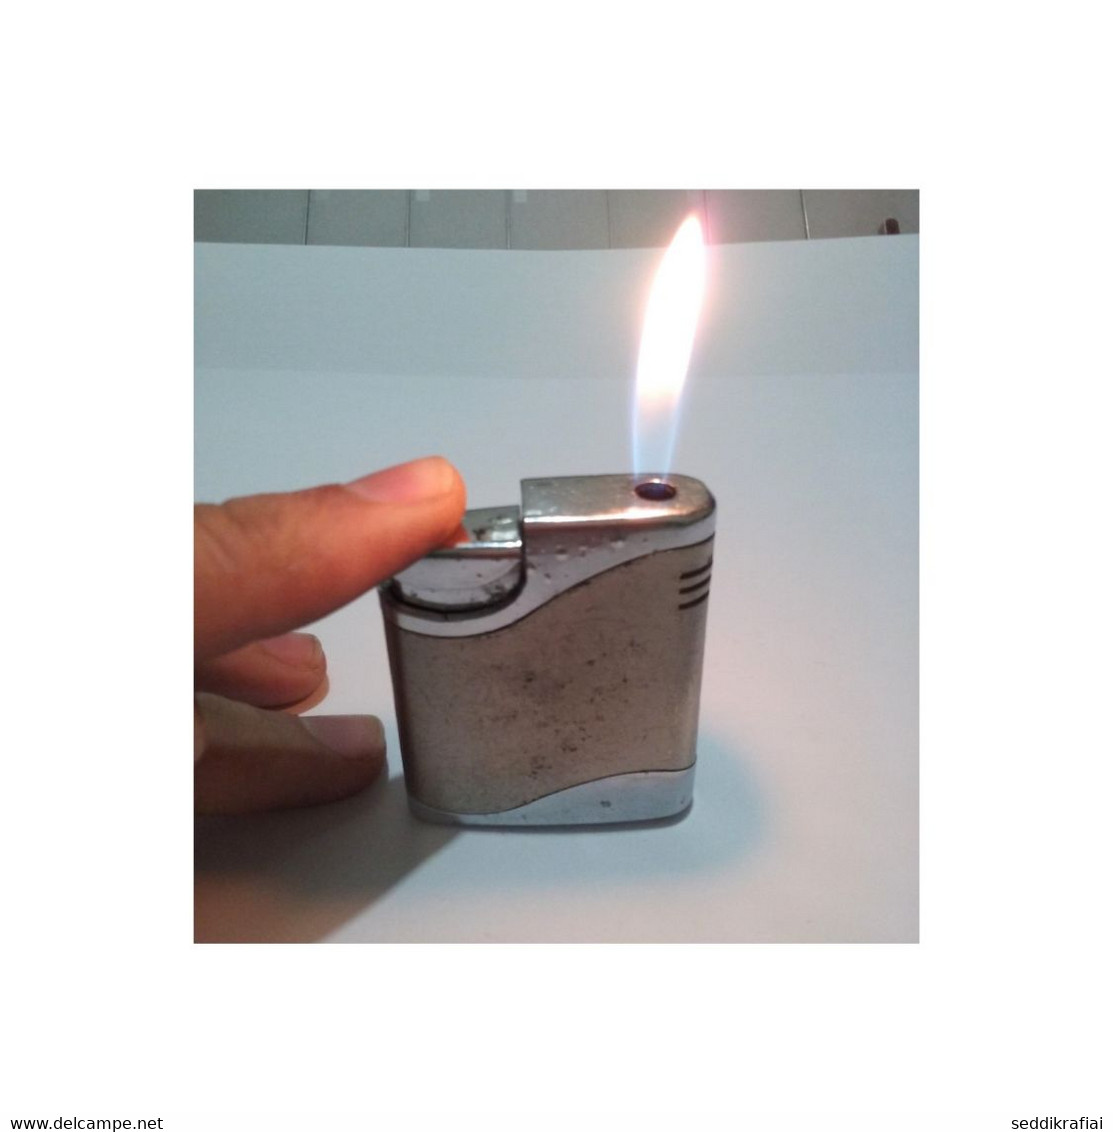 Vintage Lighter Electric Pocket Silver Gas Cigarette Collector's Item Working Very Good